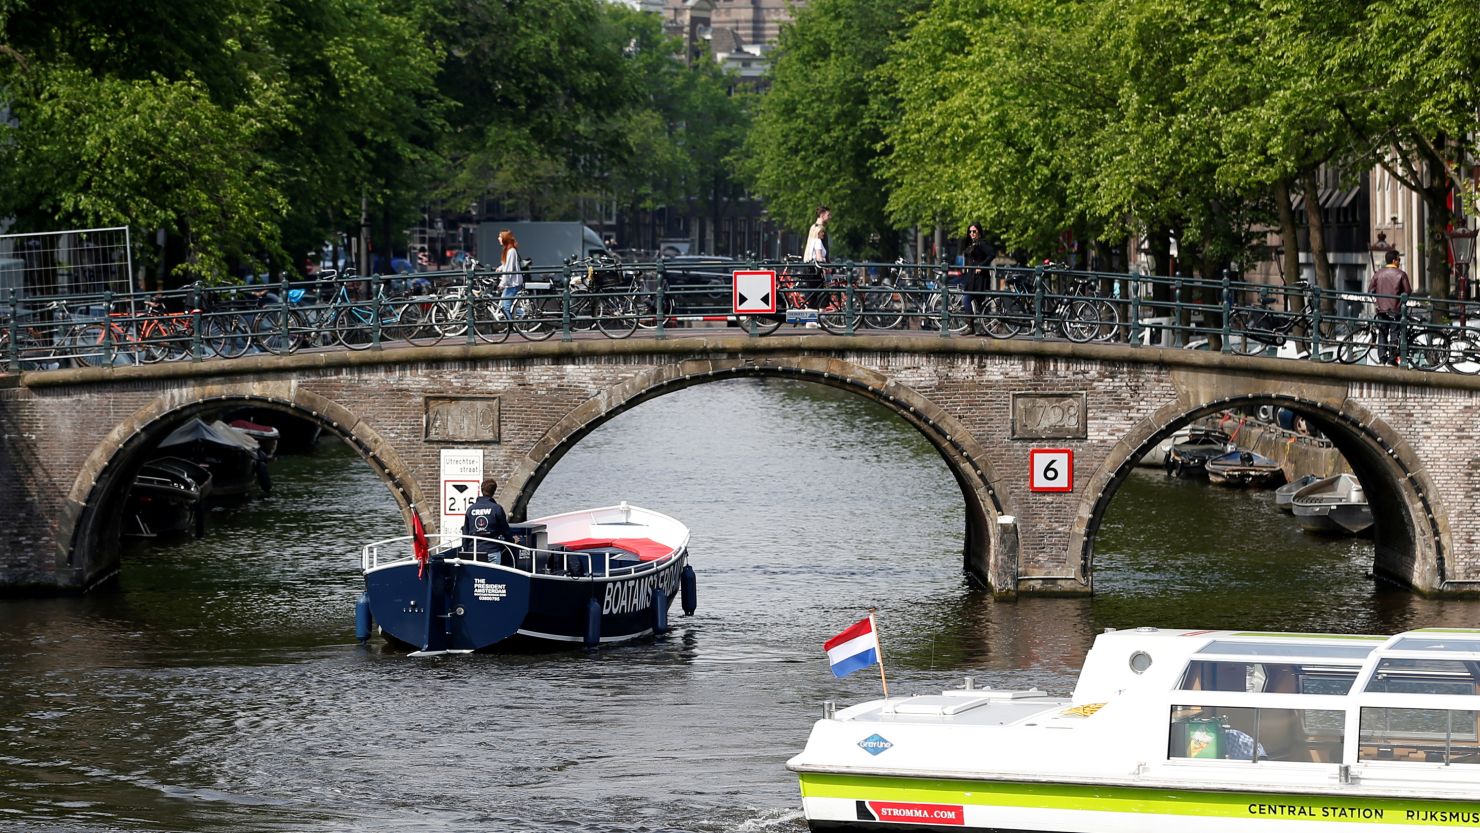 Tourist boats cruise on a canal in Amsterdam.